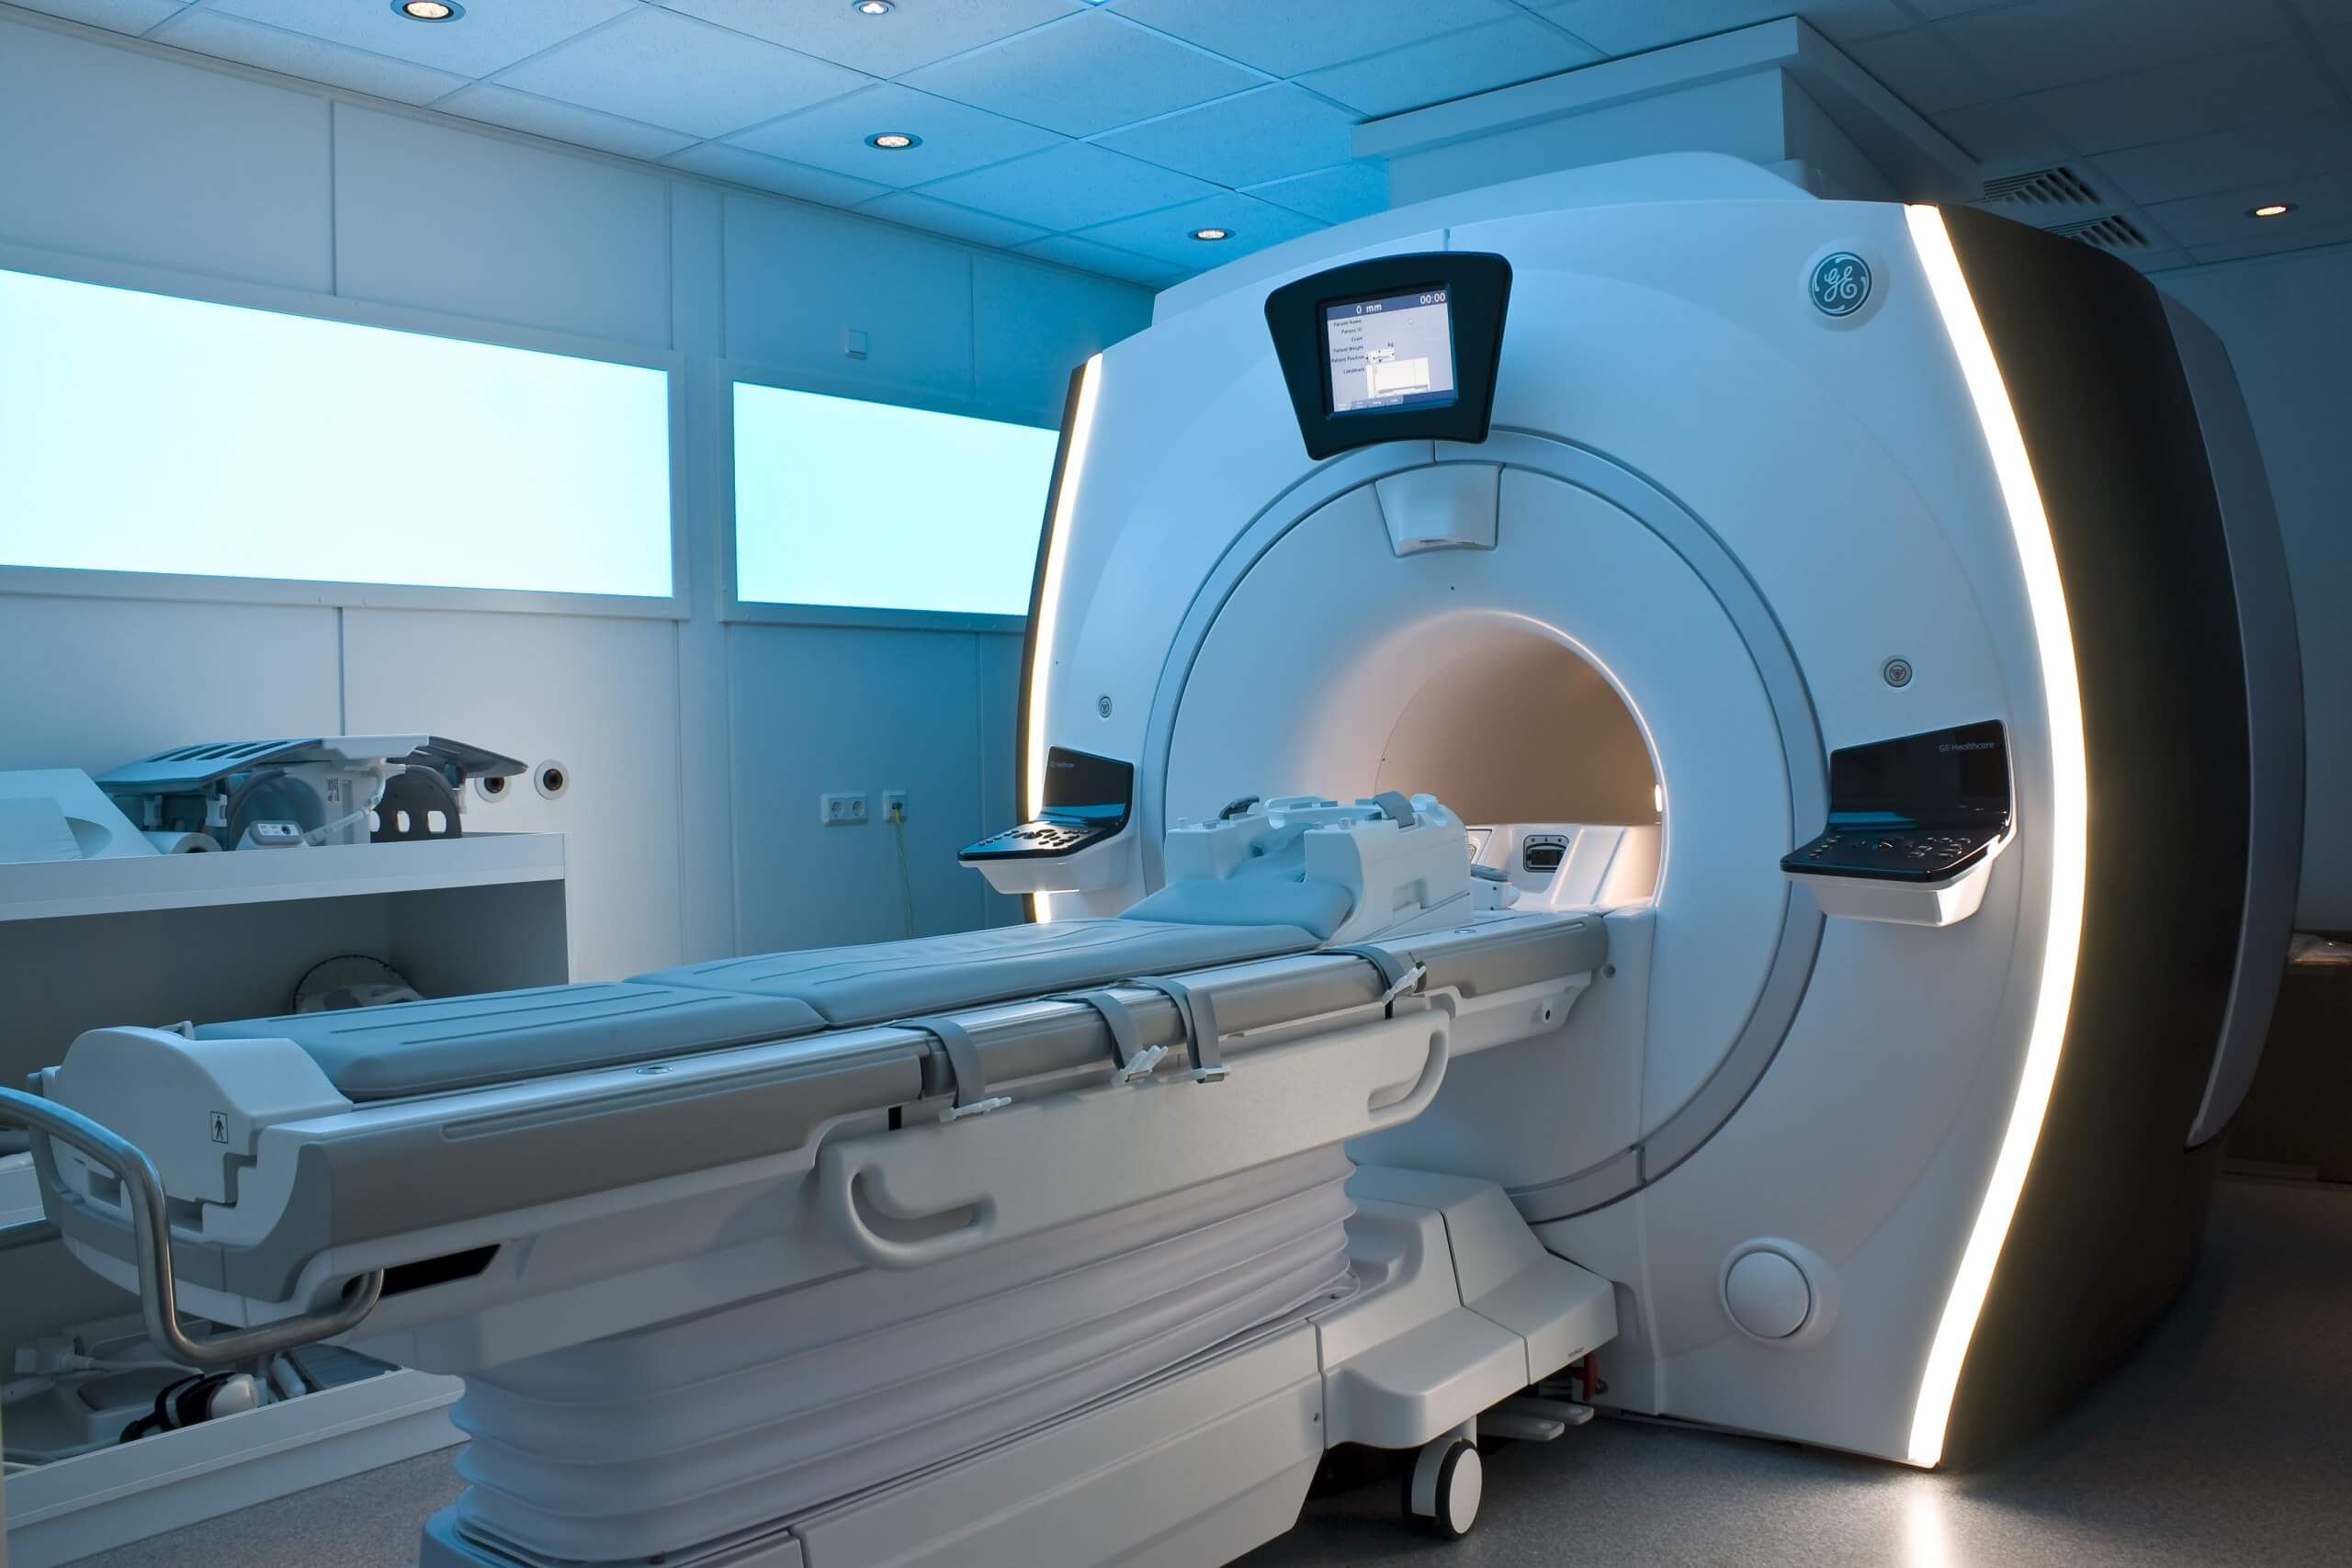 Security researchers fake cancerous nodes in CT scans with machine learning